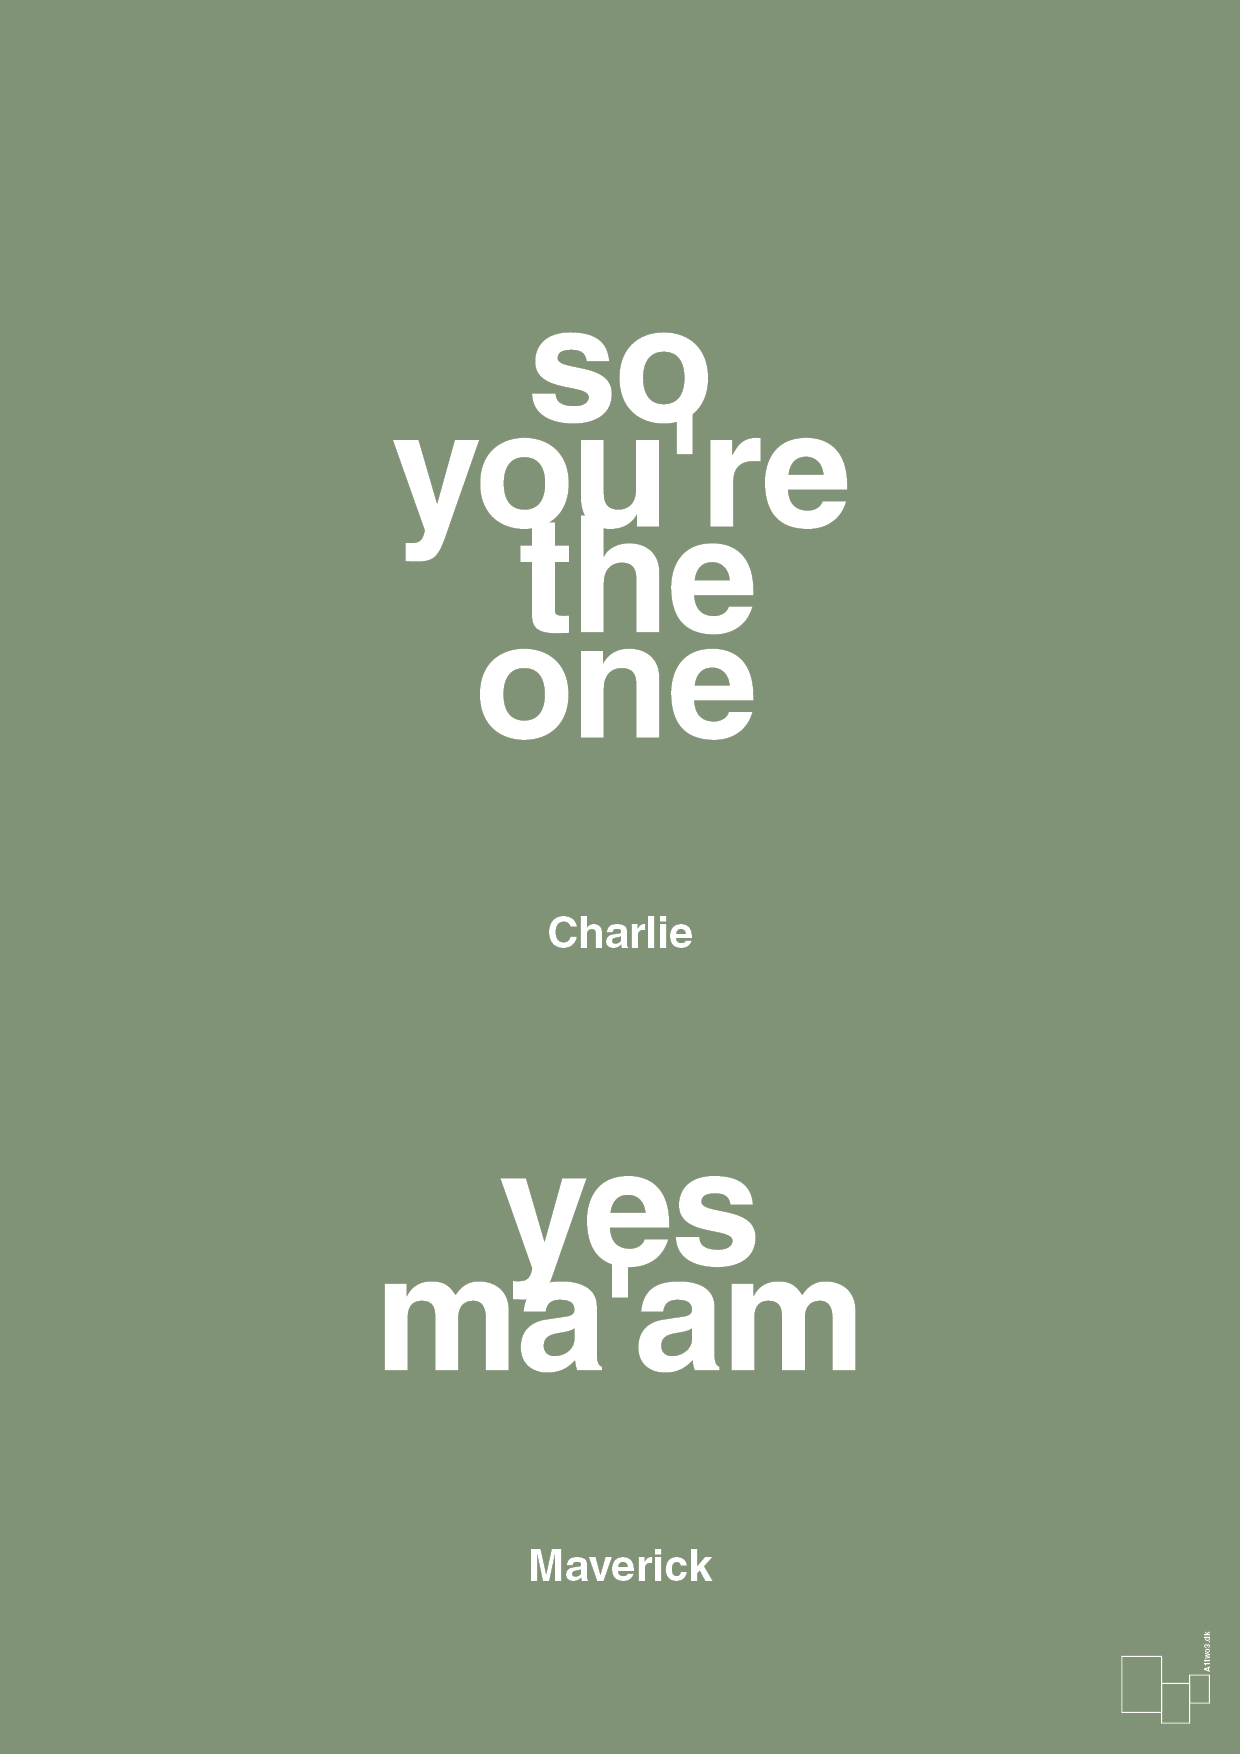 so you're the one - yes ma'am - Plakat med Citater i Jade